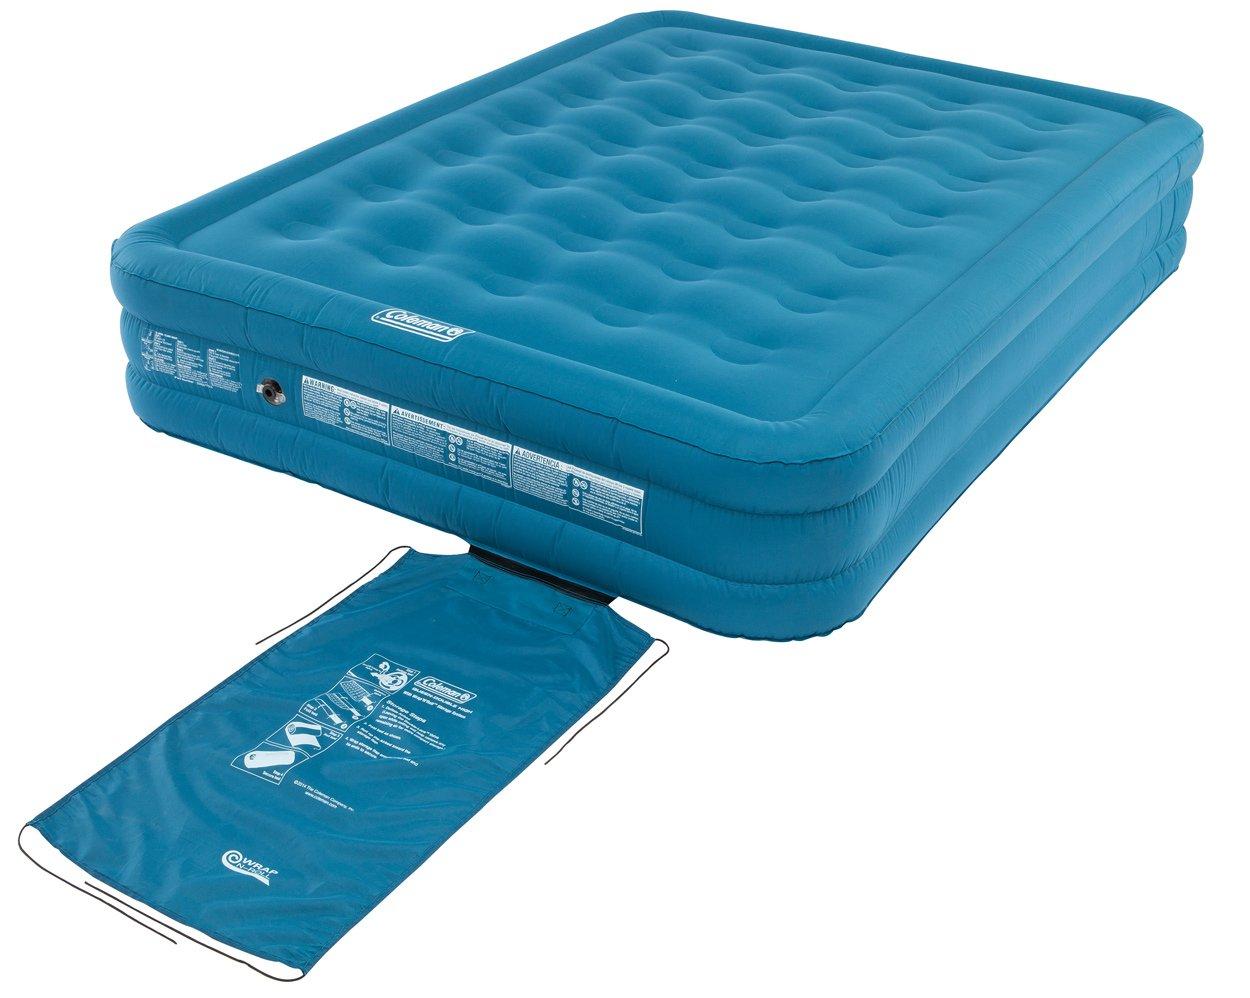  COLEMAN Extra Durable Raised Double Airbed, Blue